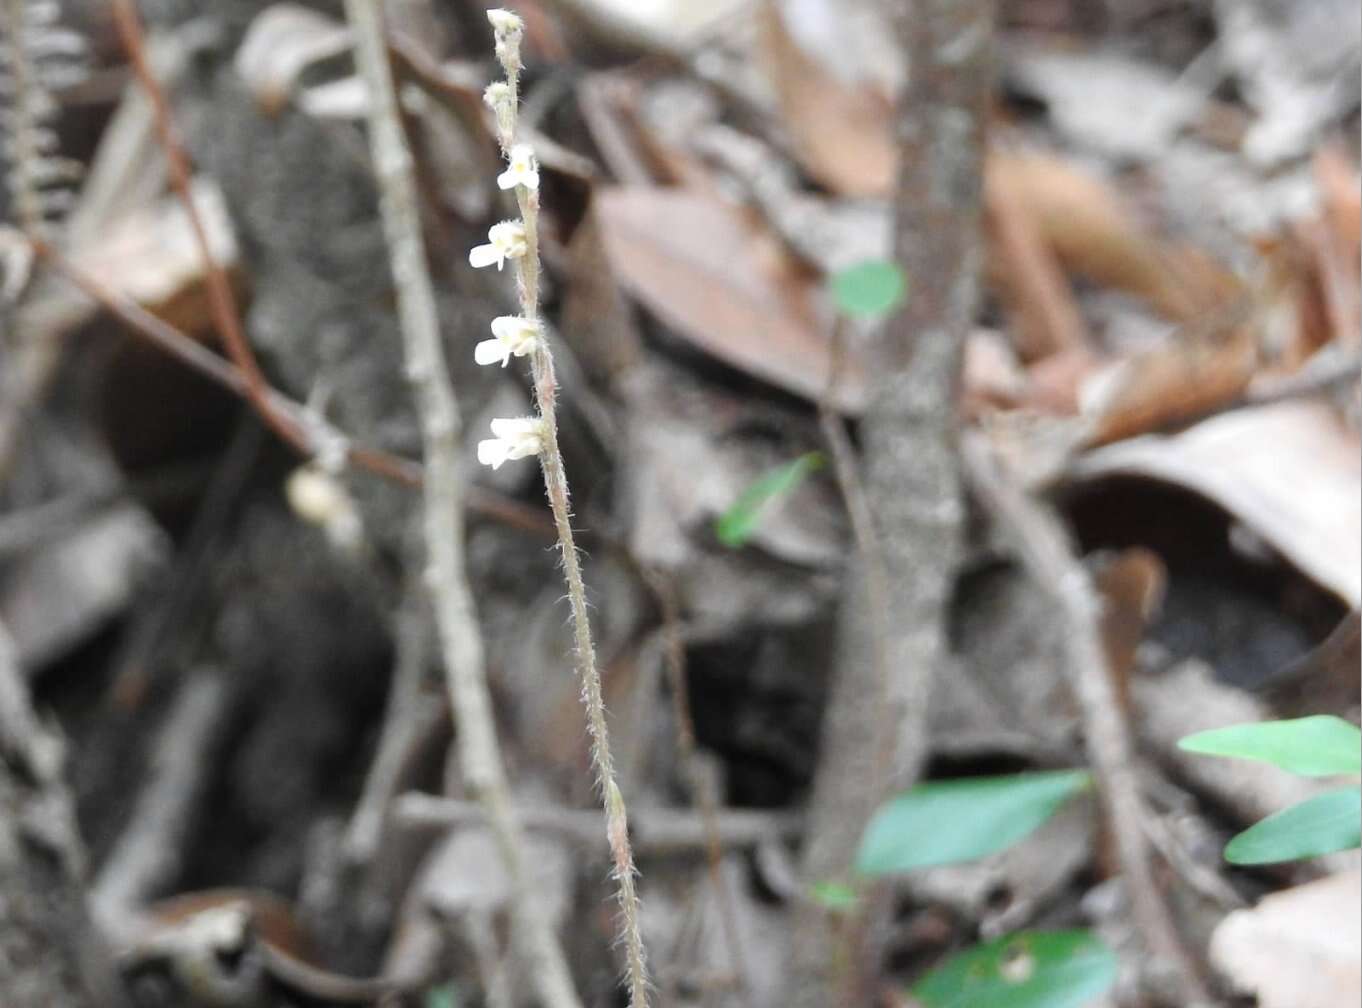 Image of Cleric's Collar Orchid